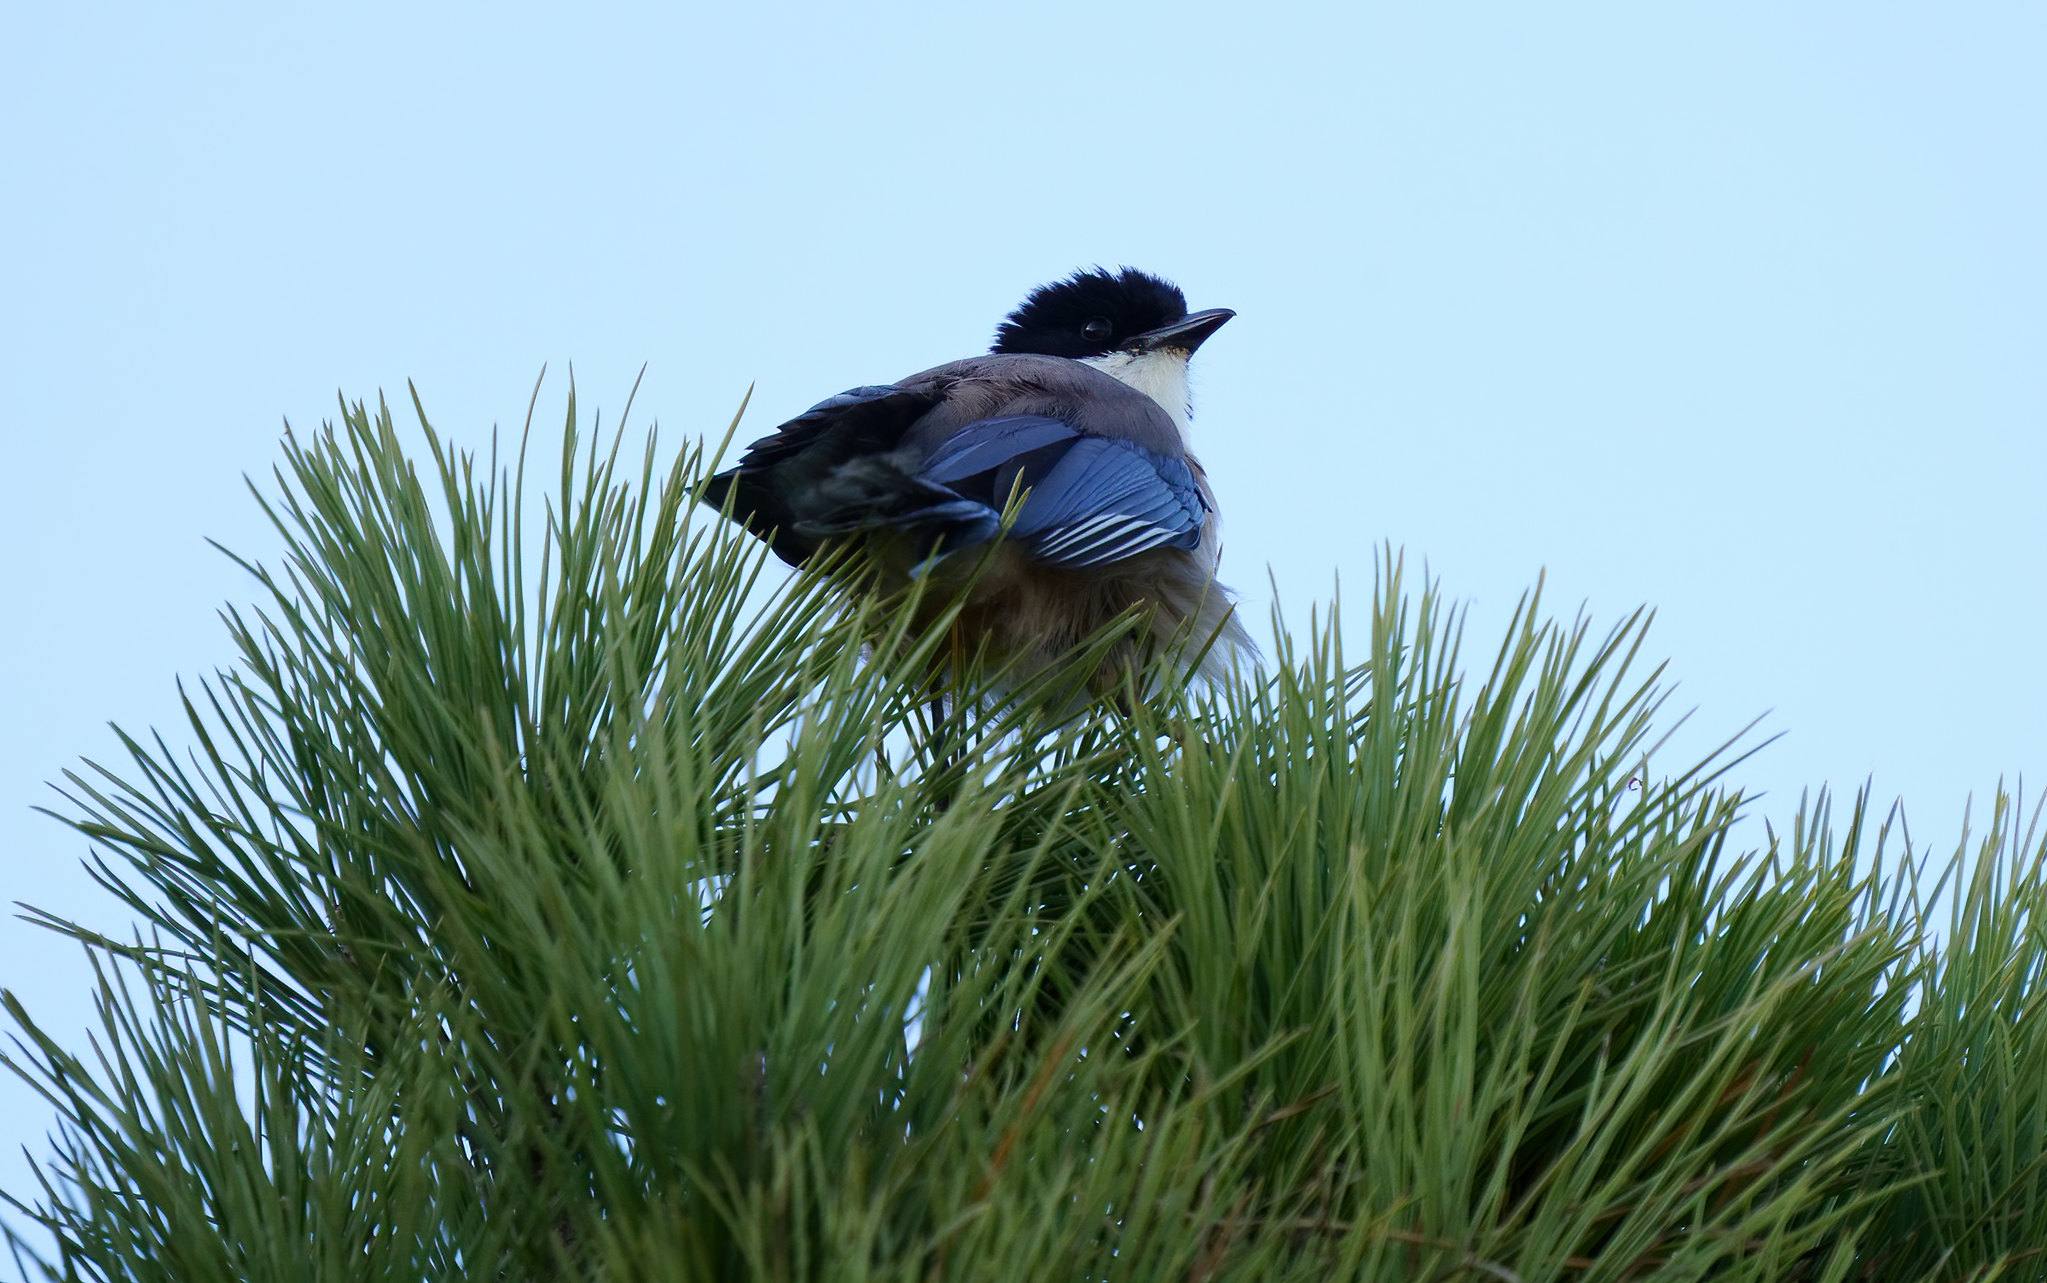 Azure-winged Magpie - everywhere, but so difficult to photograph